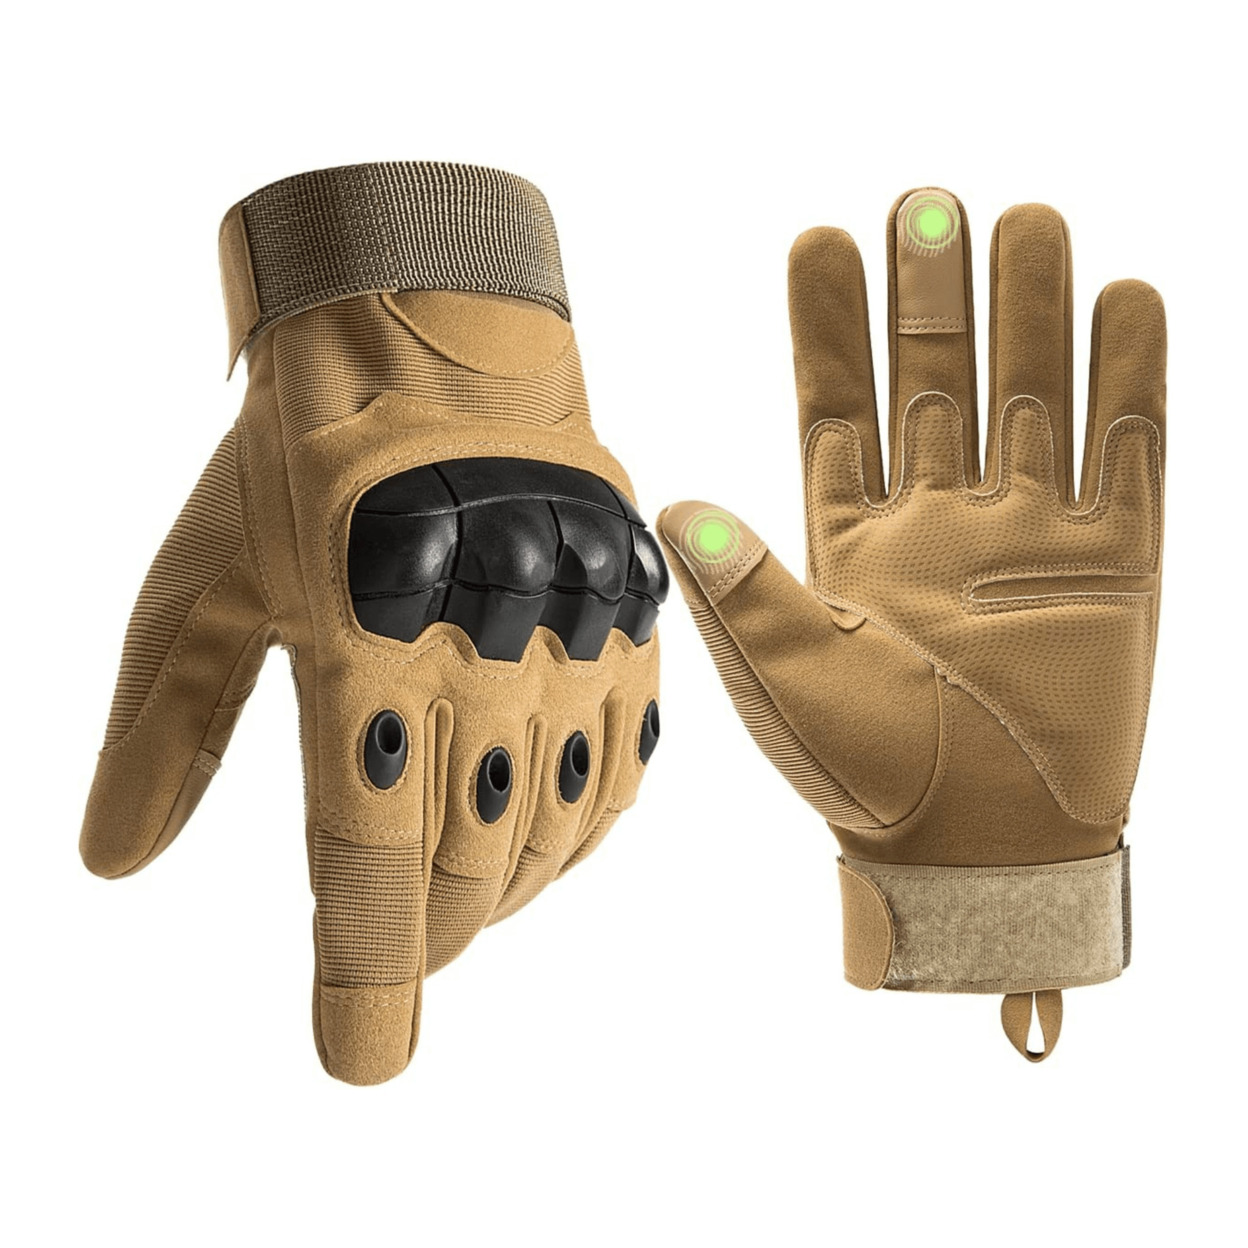 Tactical Military Airsoft Gloves For Outdoor Sports, Paintball, And Motorcycling With Touchscreen Fingertip Capability - Tan, Medium